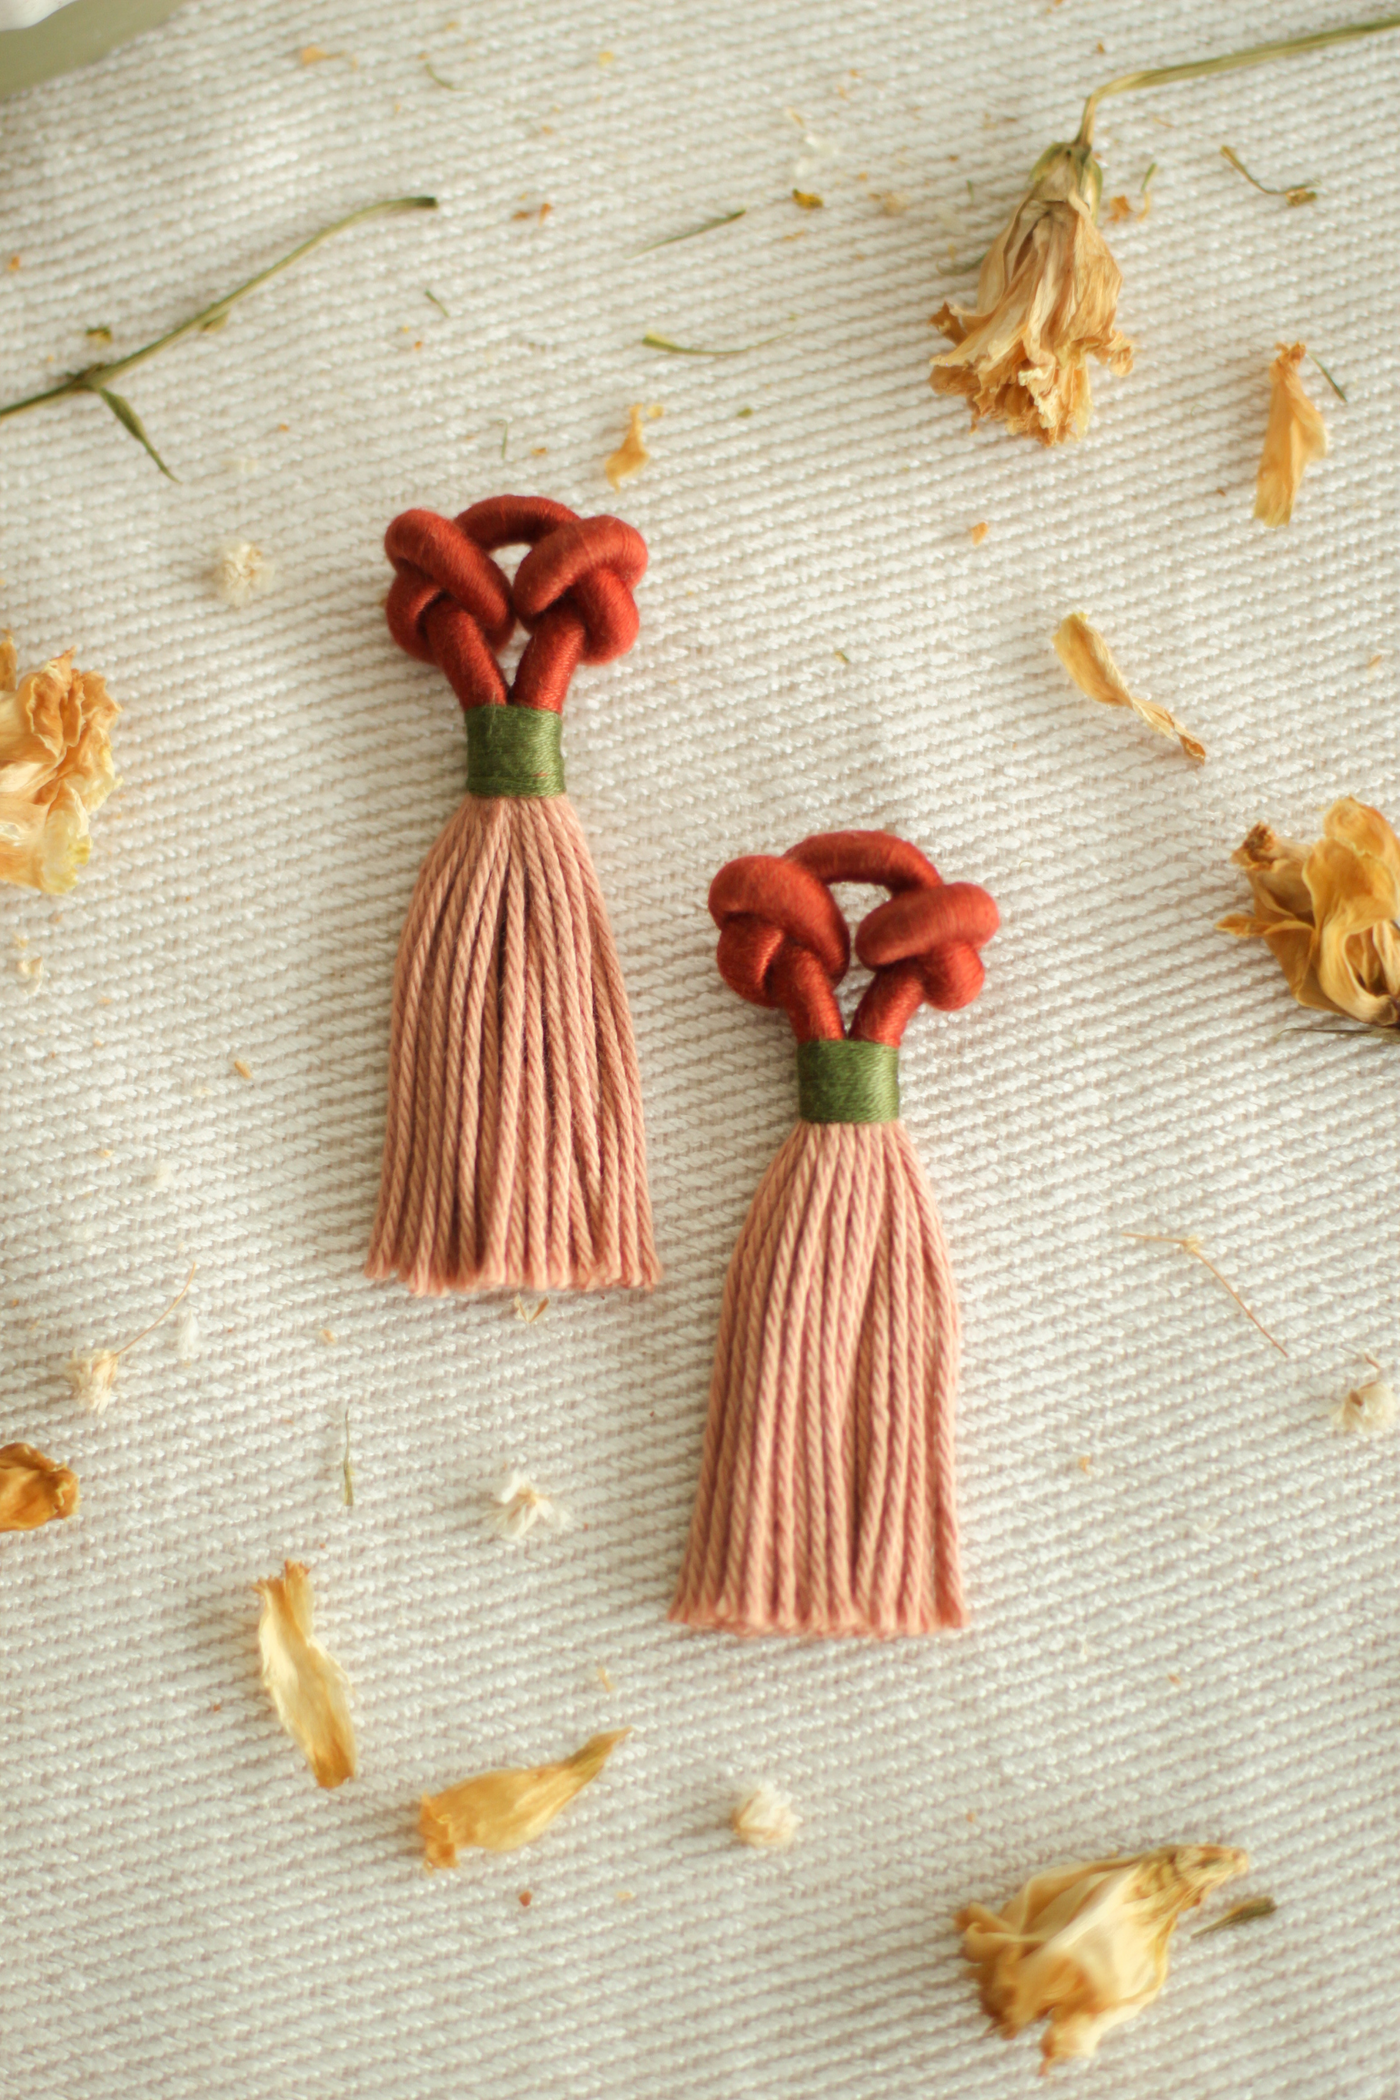 Talee Rama Knot Earrings in Sunset & Apricot, available on ZERRIN with free Singapore shipping